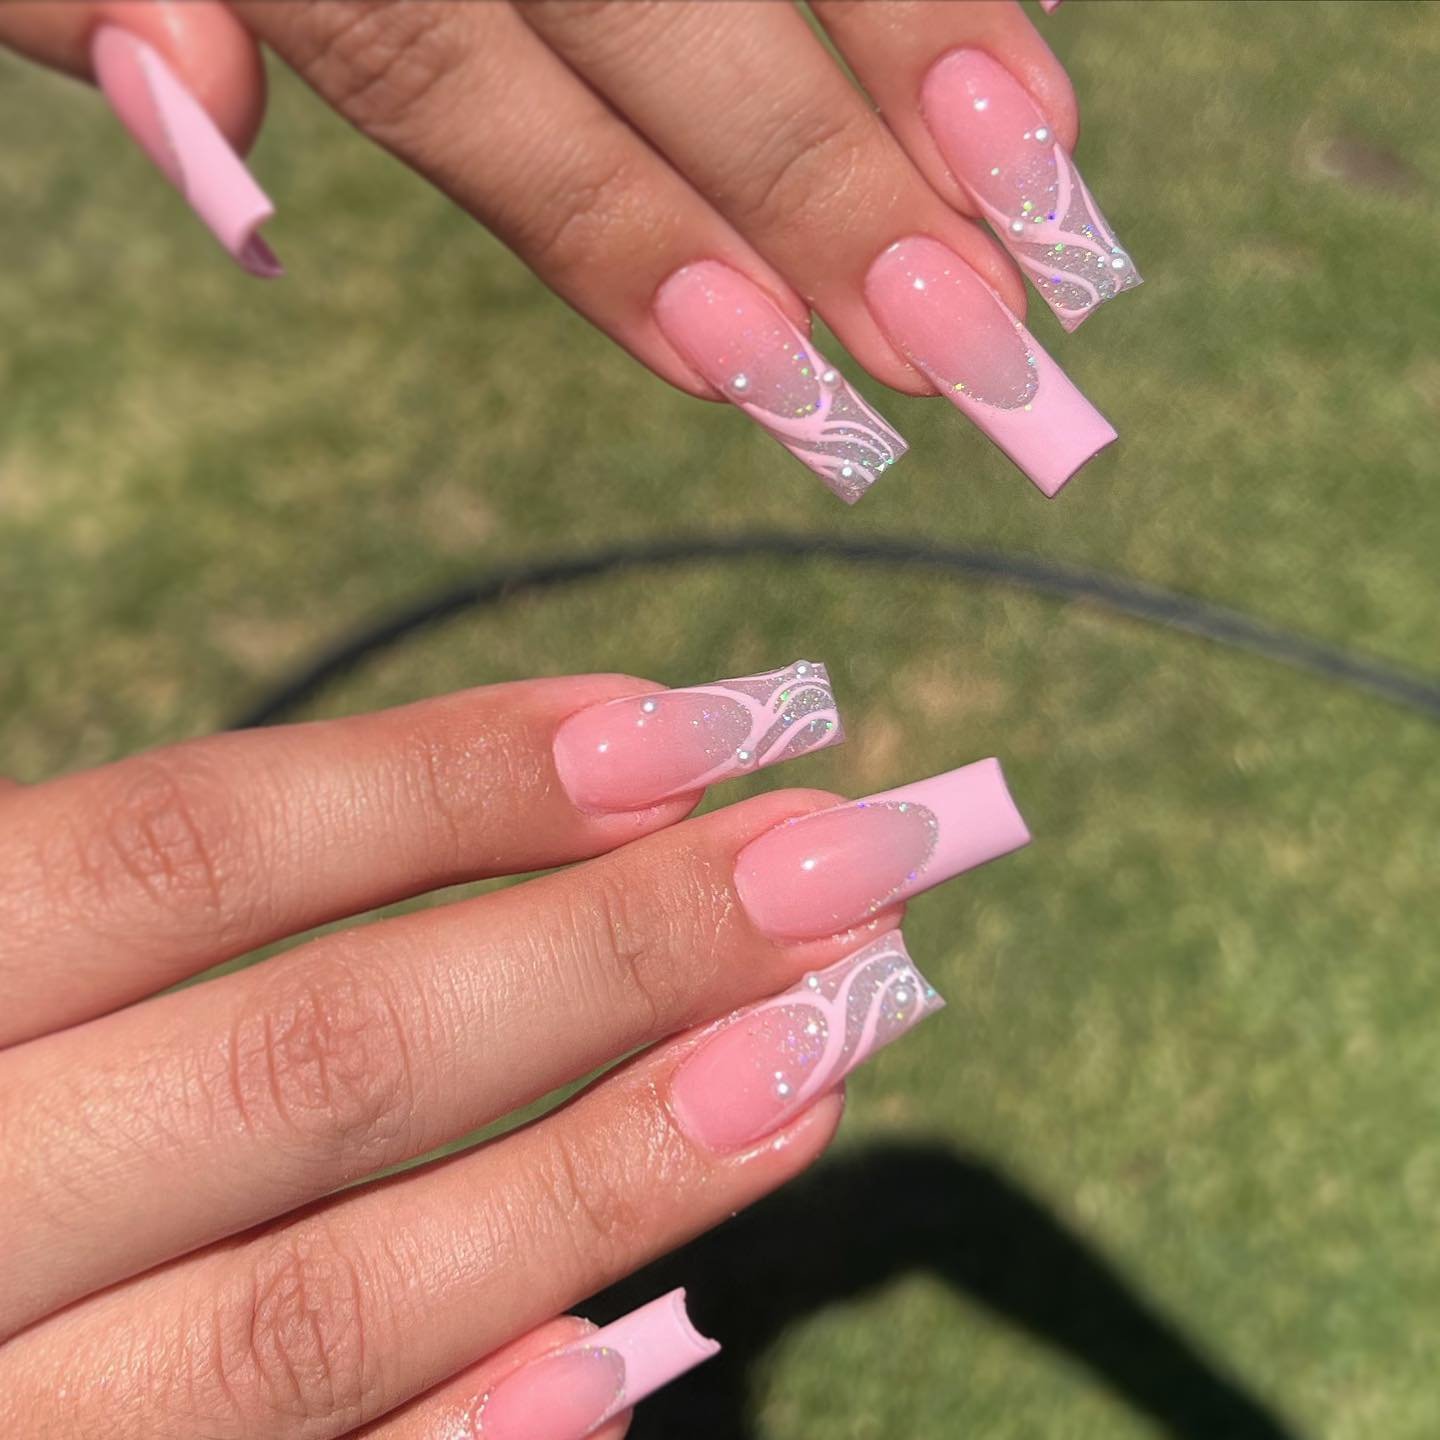 28 - Picture of Acrylic Nails